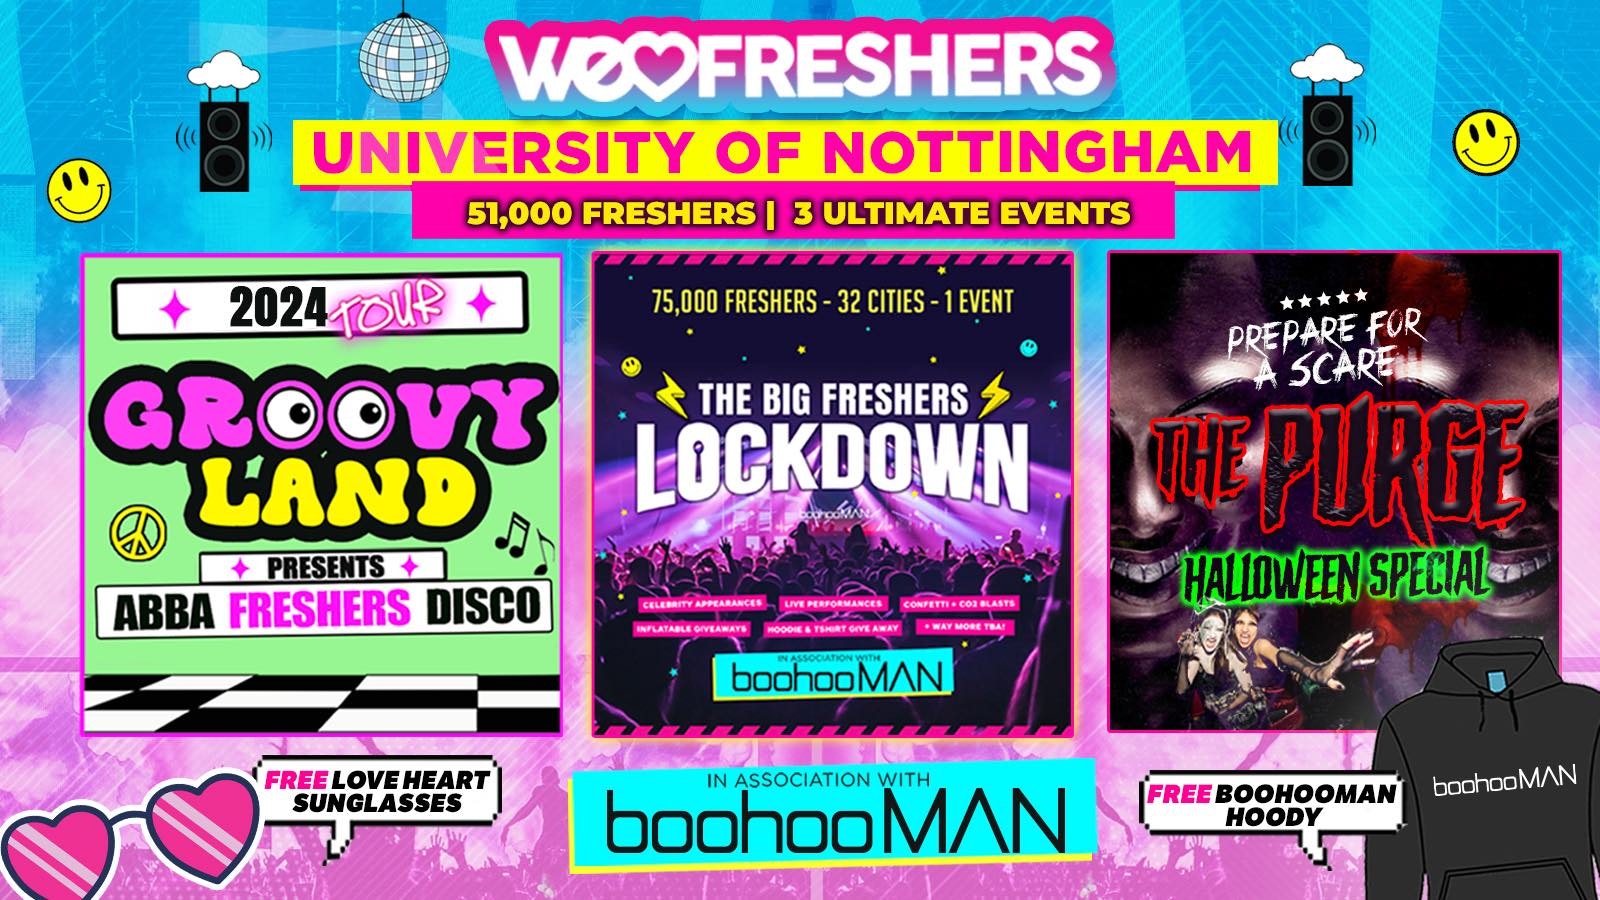 WE LOVE NOTTINGHAM UON FRESHERS 2024 in association with boohooMAN ❗FREE BOOHOOMAN HOODIE TODAY ONLY❗